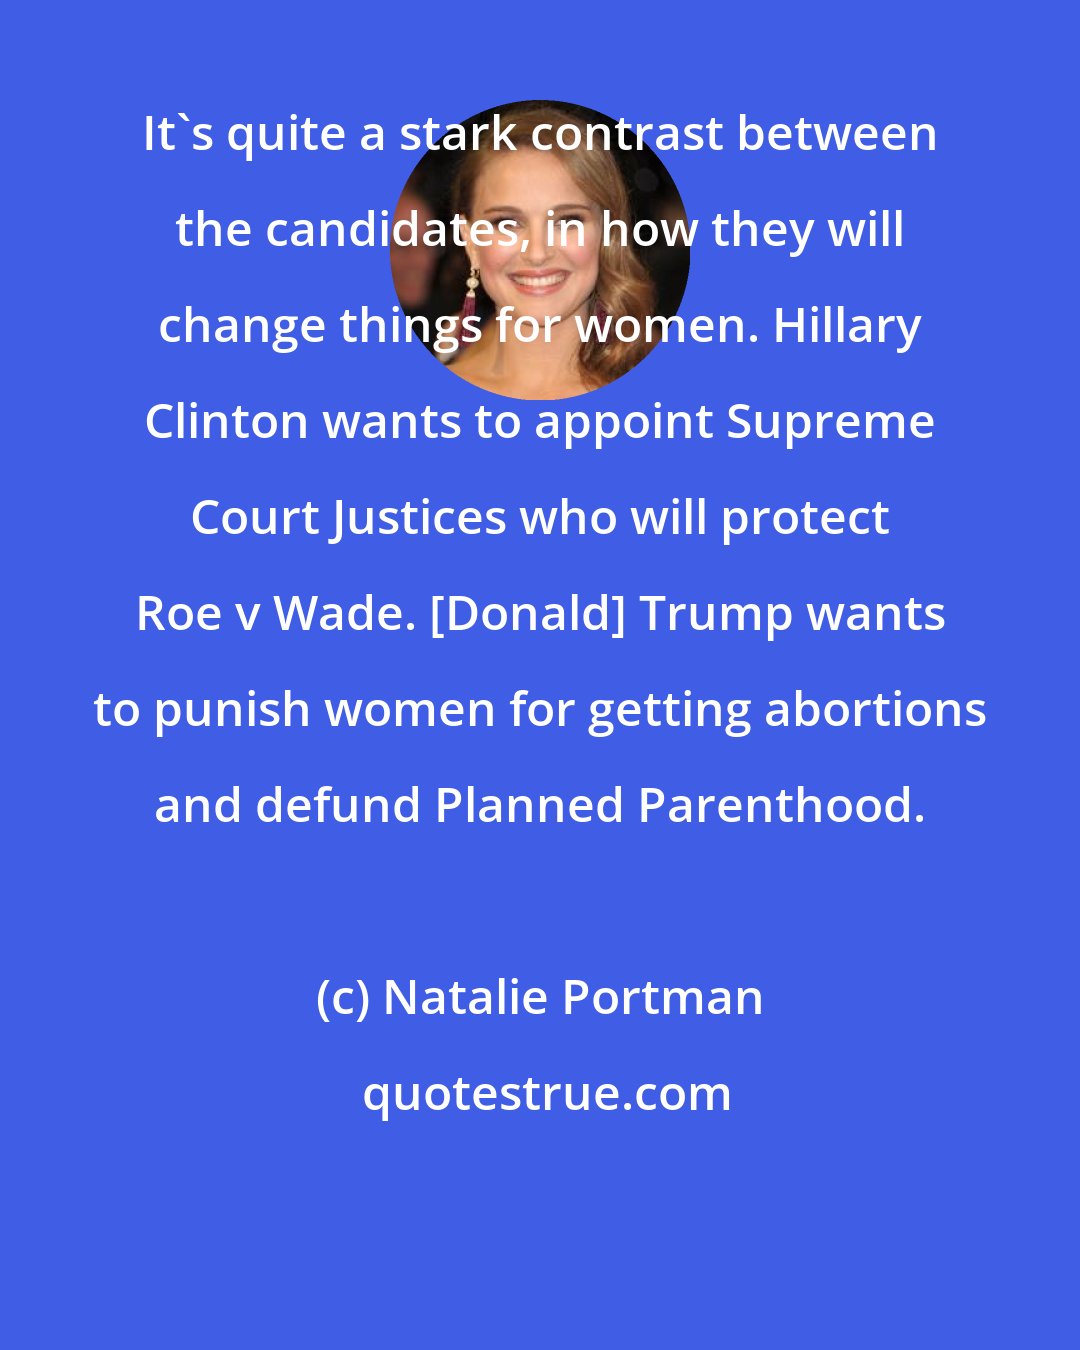 Natalie Portman: It's quite a stark contrast between the candidates, in how they will change things for women. Hillary Clinton wants to appoint Supreme Court Justices who will protect Roe v Wade. [Donald] Trump wants to punish women for getting abortions and defund Planned Parenthood.